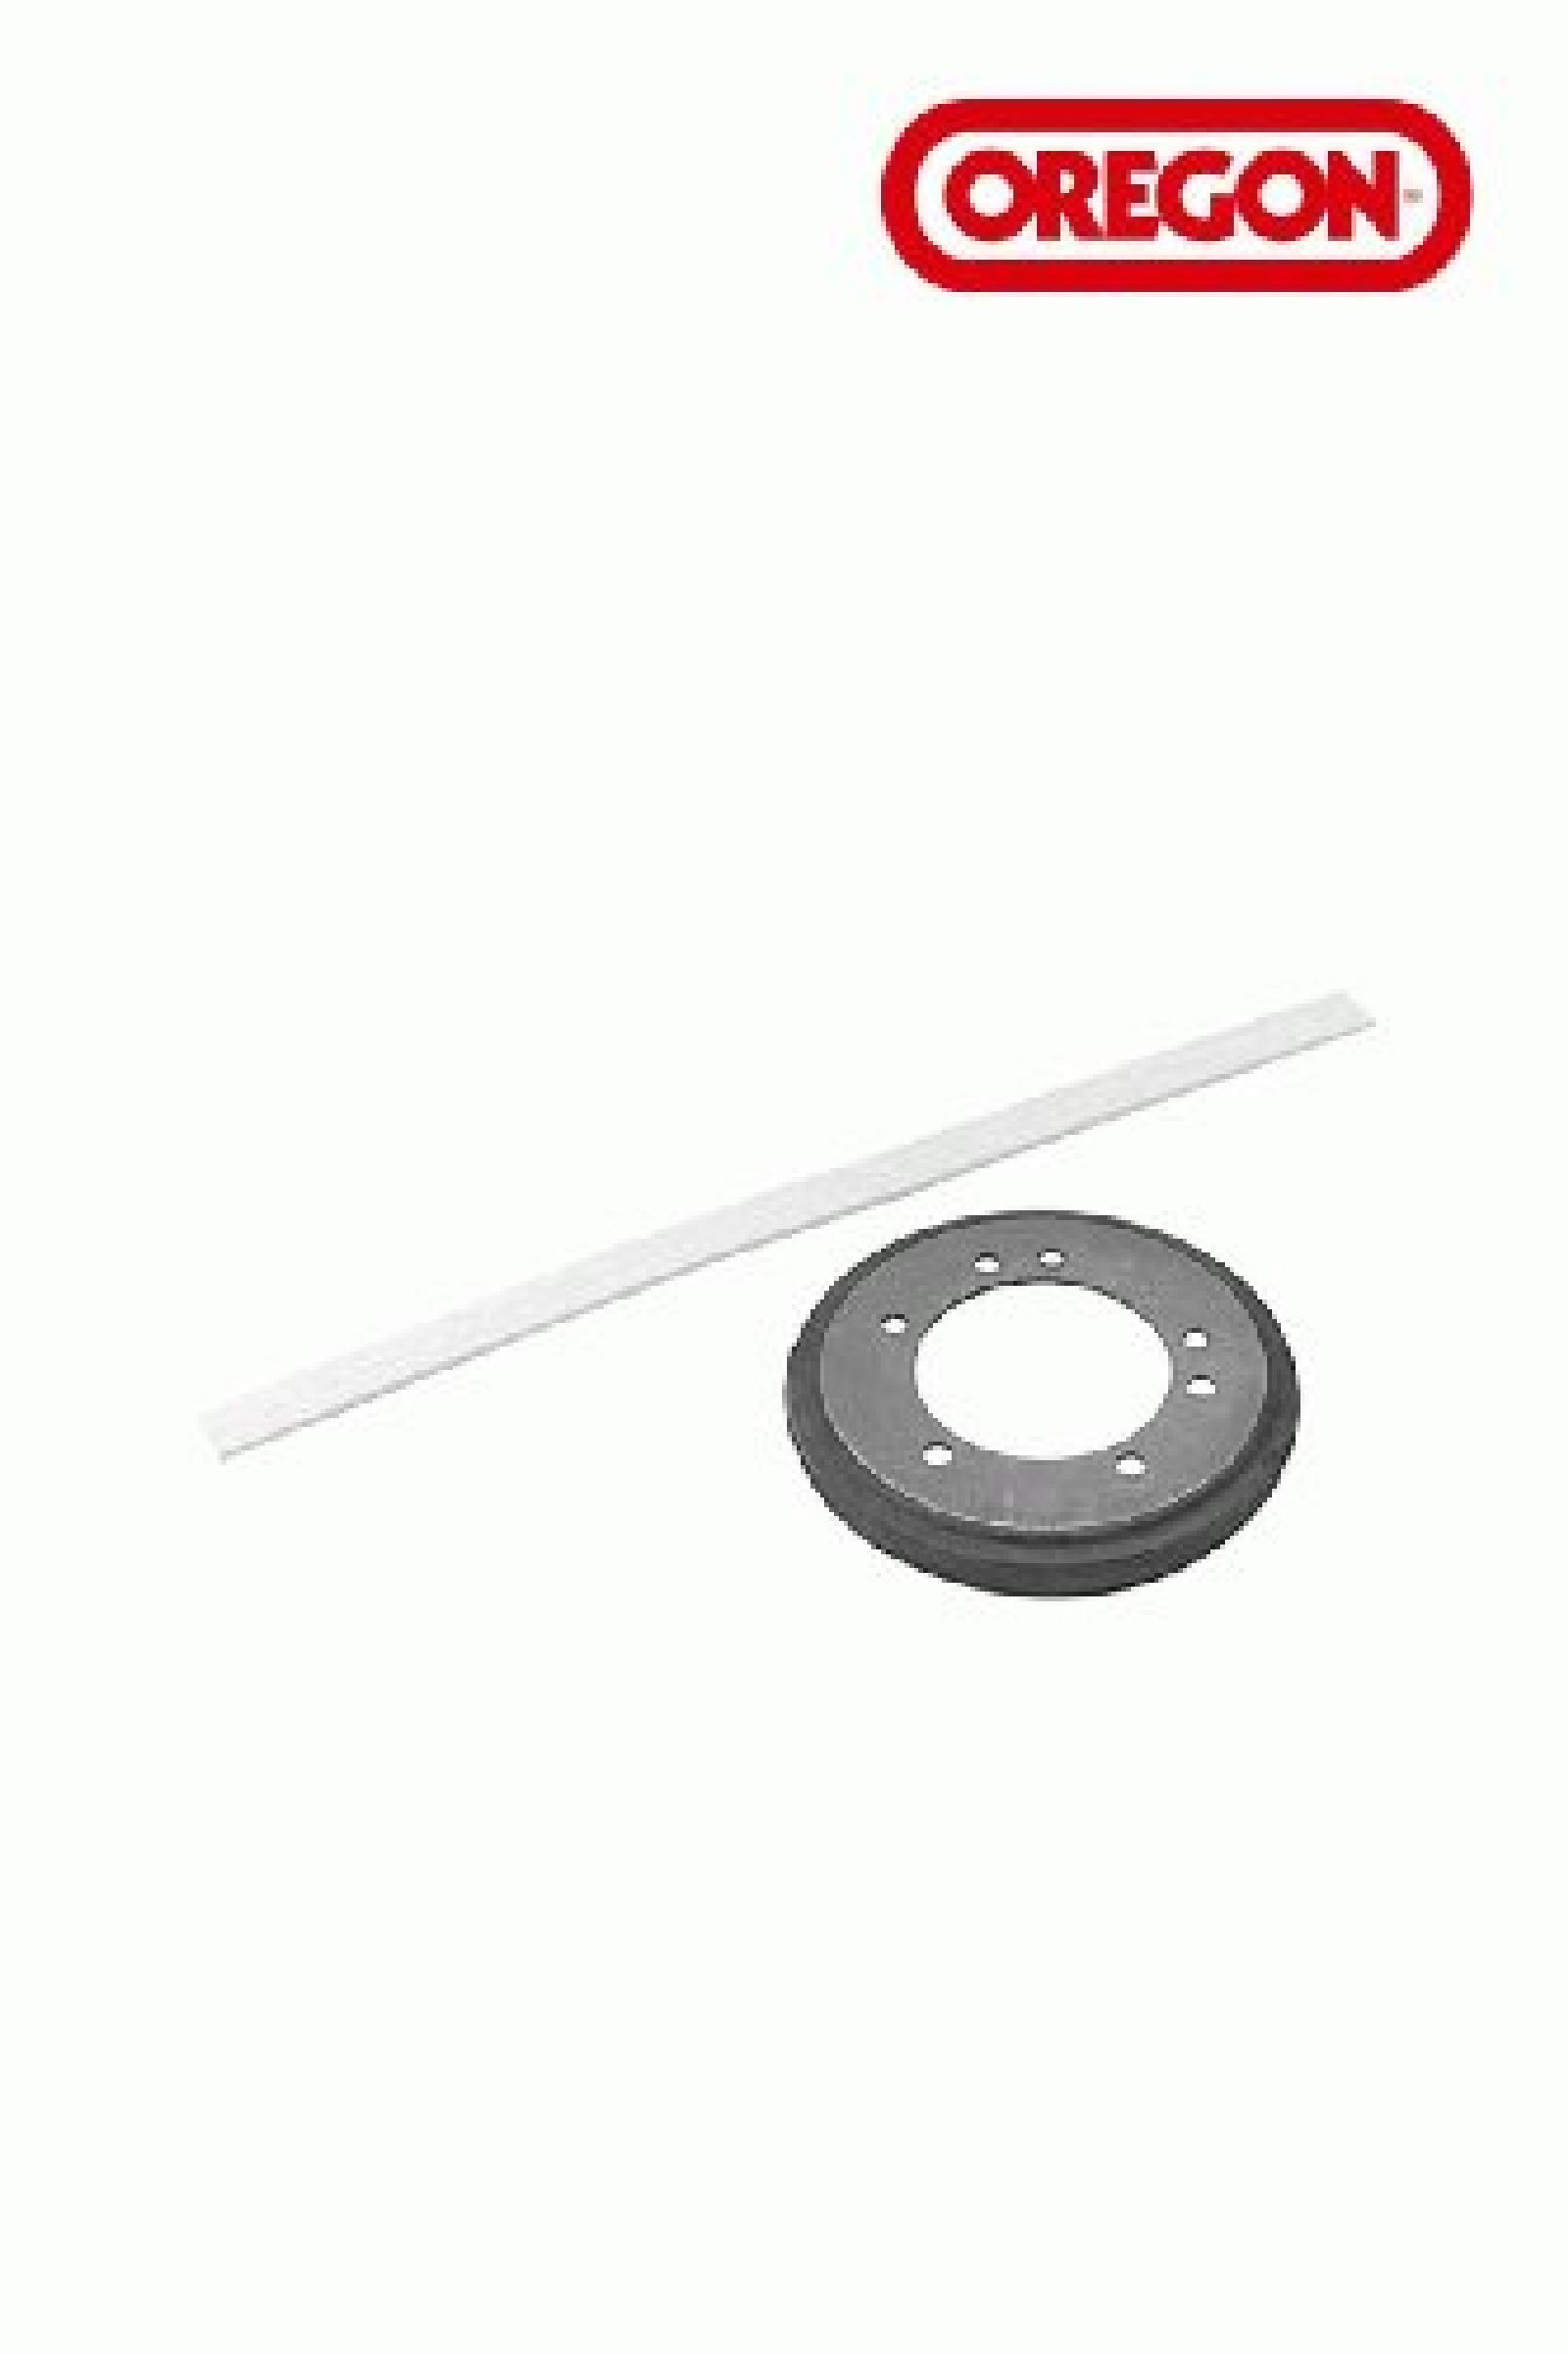 DRIVE DISK WITH LINER SNA part# 76-014 by Oregon